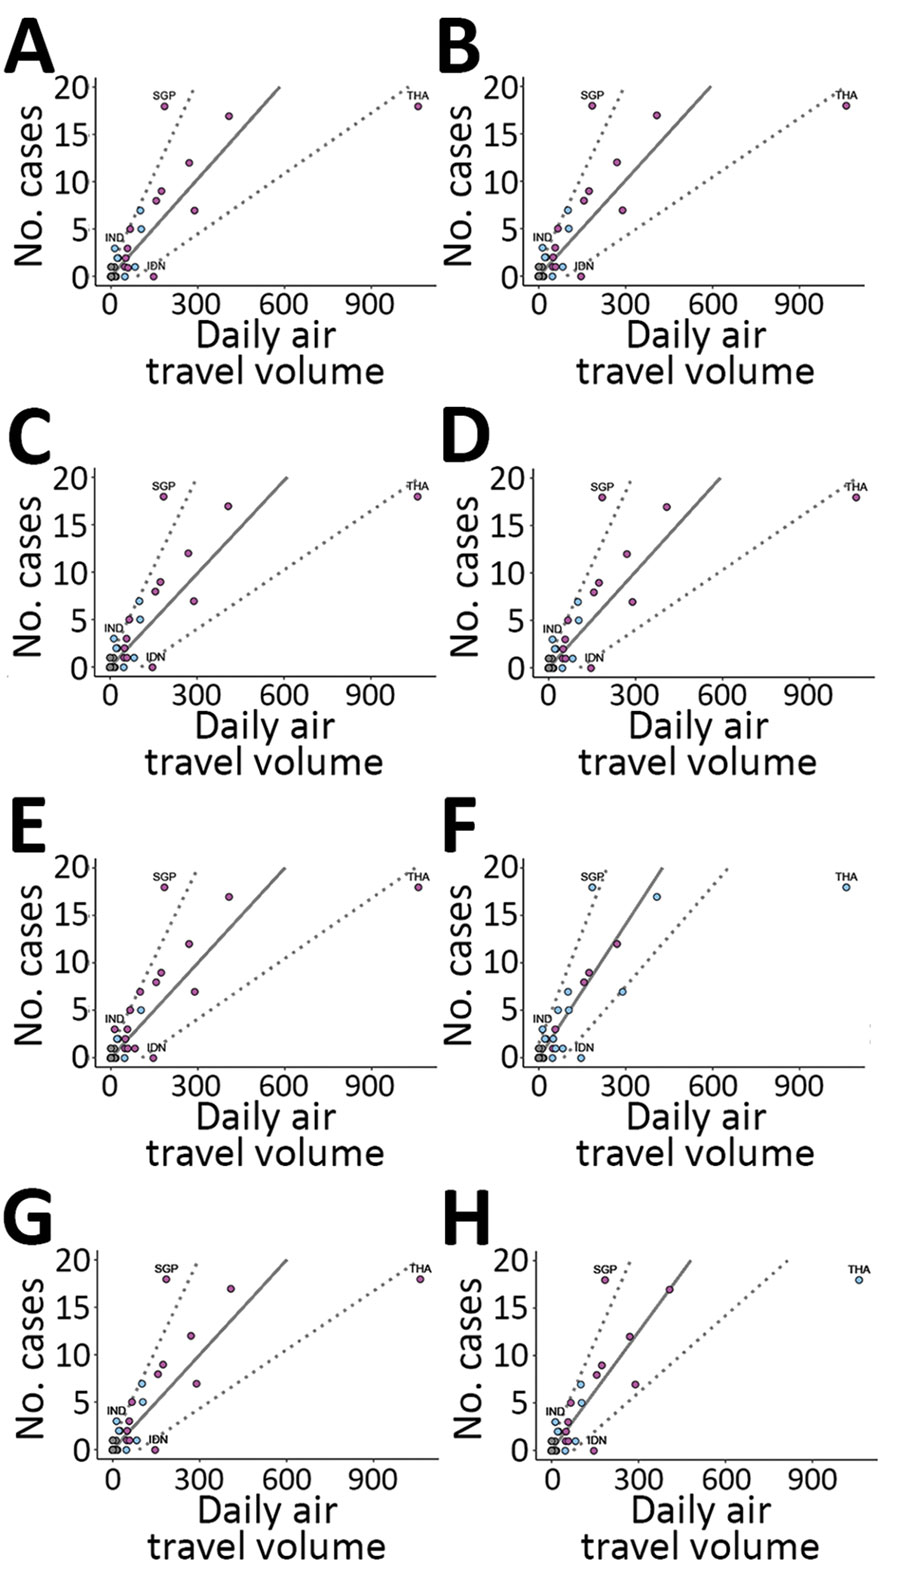 Analyses of imported-and-reported cases and daily air travel volume using a model to predict locations with potentially undetected cases of severe acute respiratory virus 2 (SARS-CoV-2). Air travel volume measured in number of persons/day. No. cases refers to possible undetected imported SARS-CoV-2 cases. Solid line shows the expected imported-and-reported case counts based on our model fitted to high surveillance locations, indicated by purple dots. Dashed lines indicate the 95% prediction inte